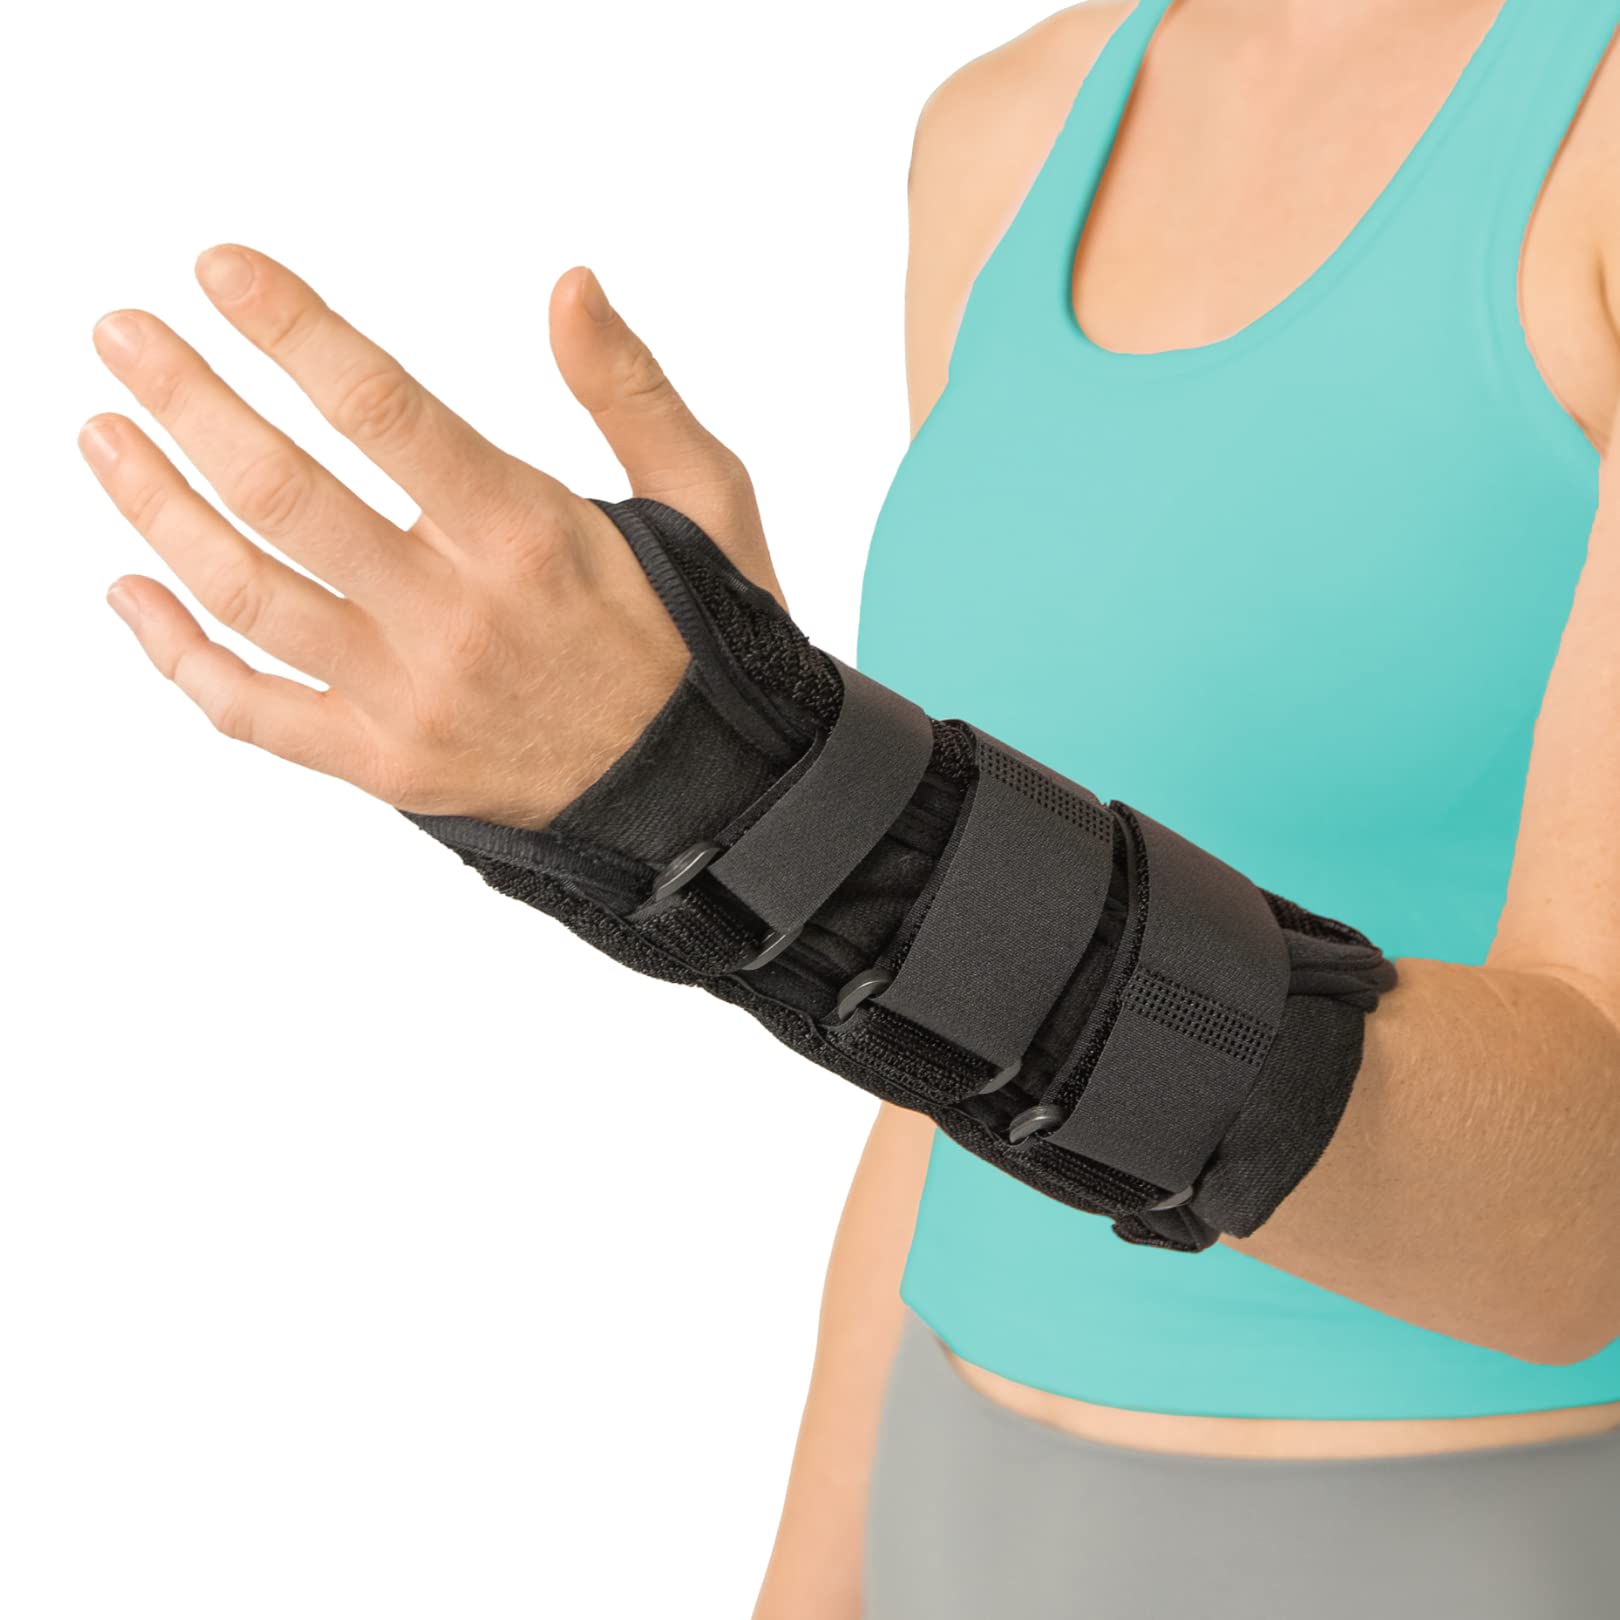 BraceAbility Volar Wrist Splint - Right or Left Hand Compression Support Brace for Carpal Tunnel Syndrome Relief, Fracture Pain, Sprained Injury, Typing, Sleeping, Arthritis, and Tendonitis Wrap